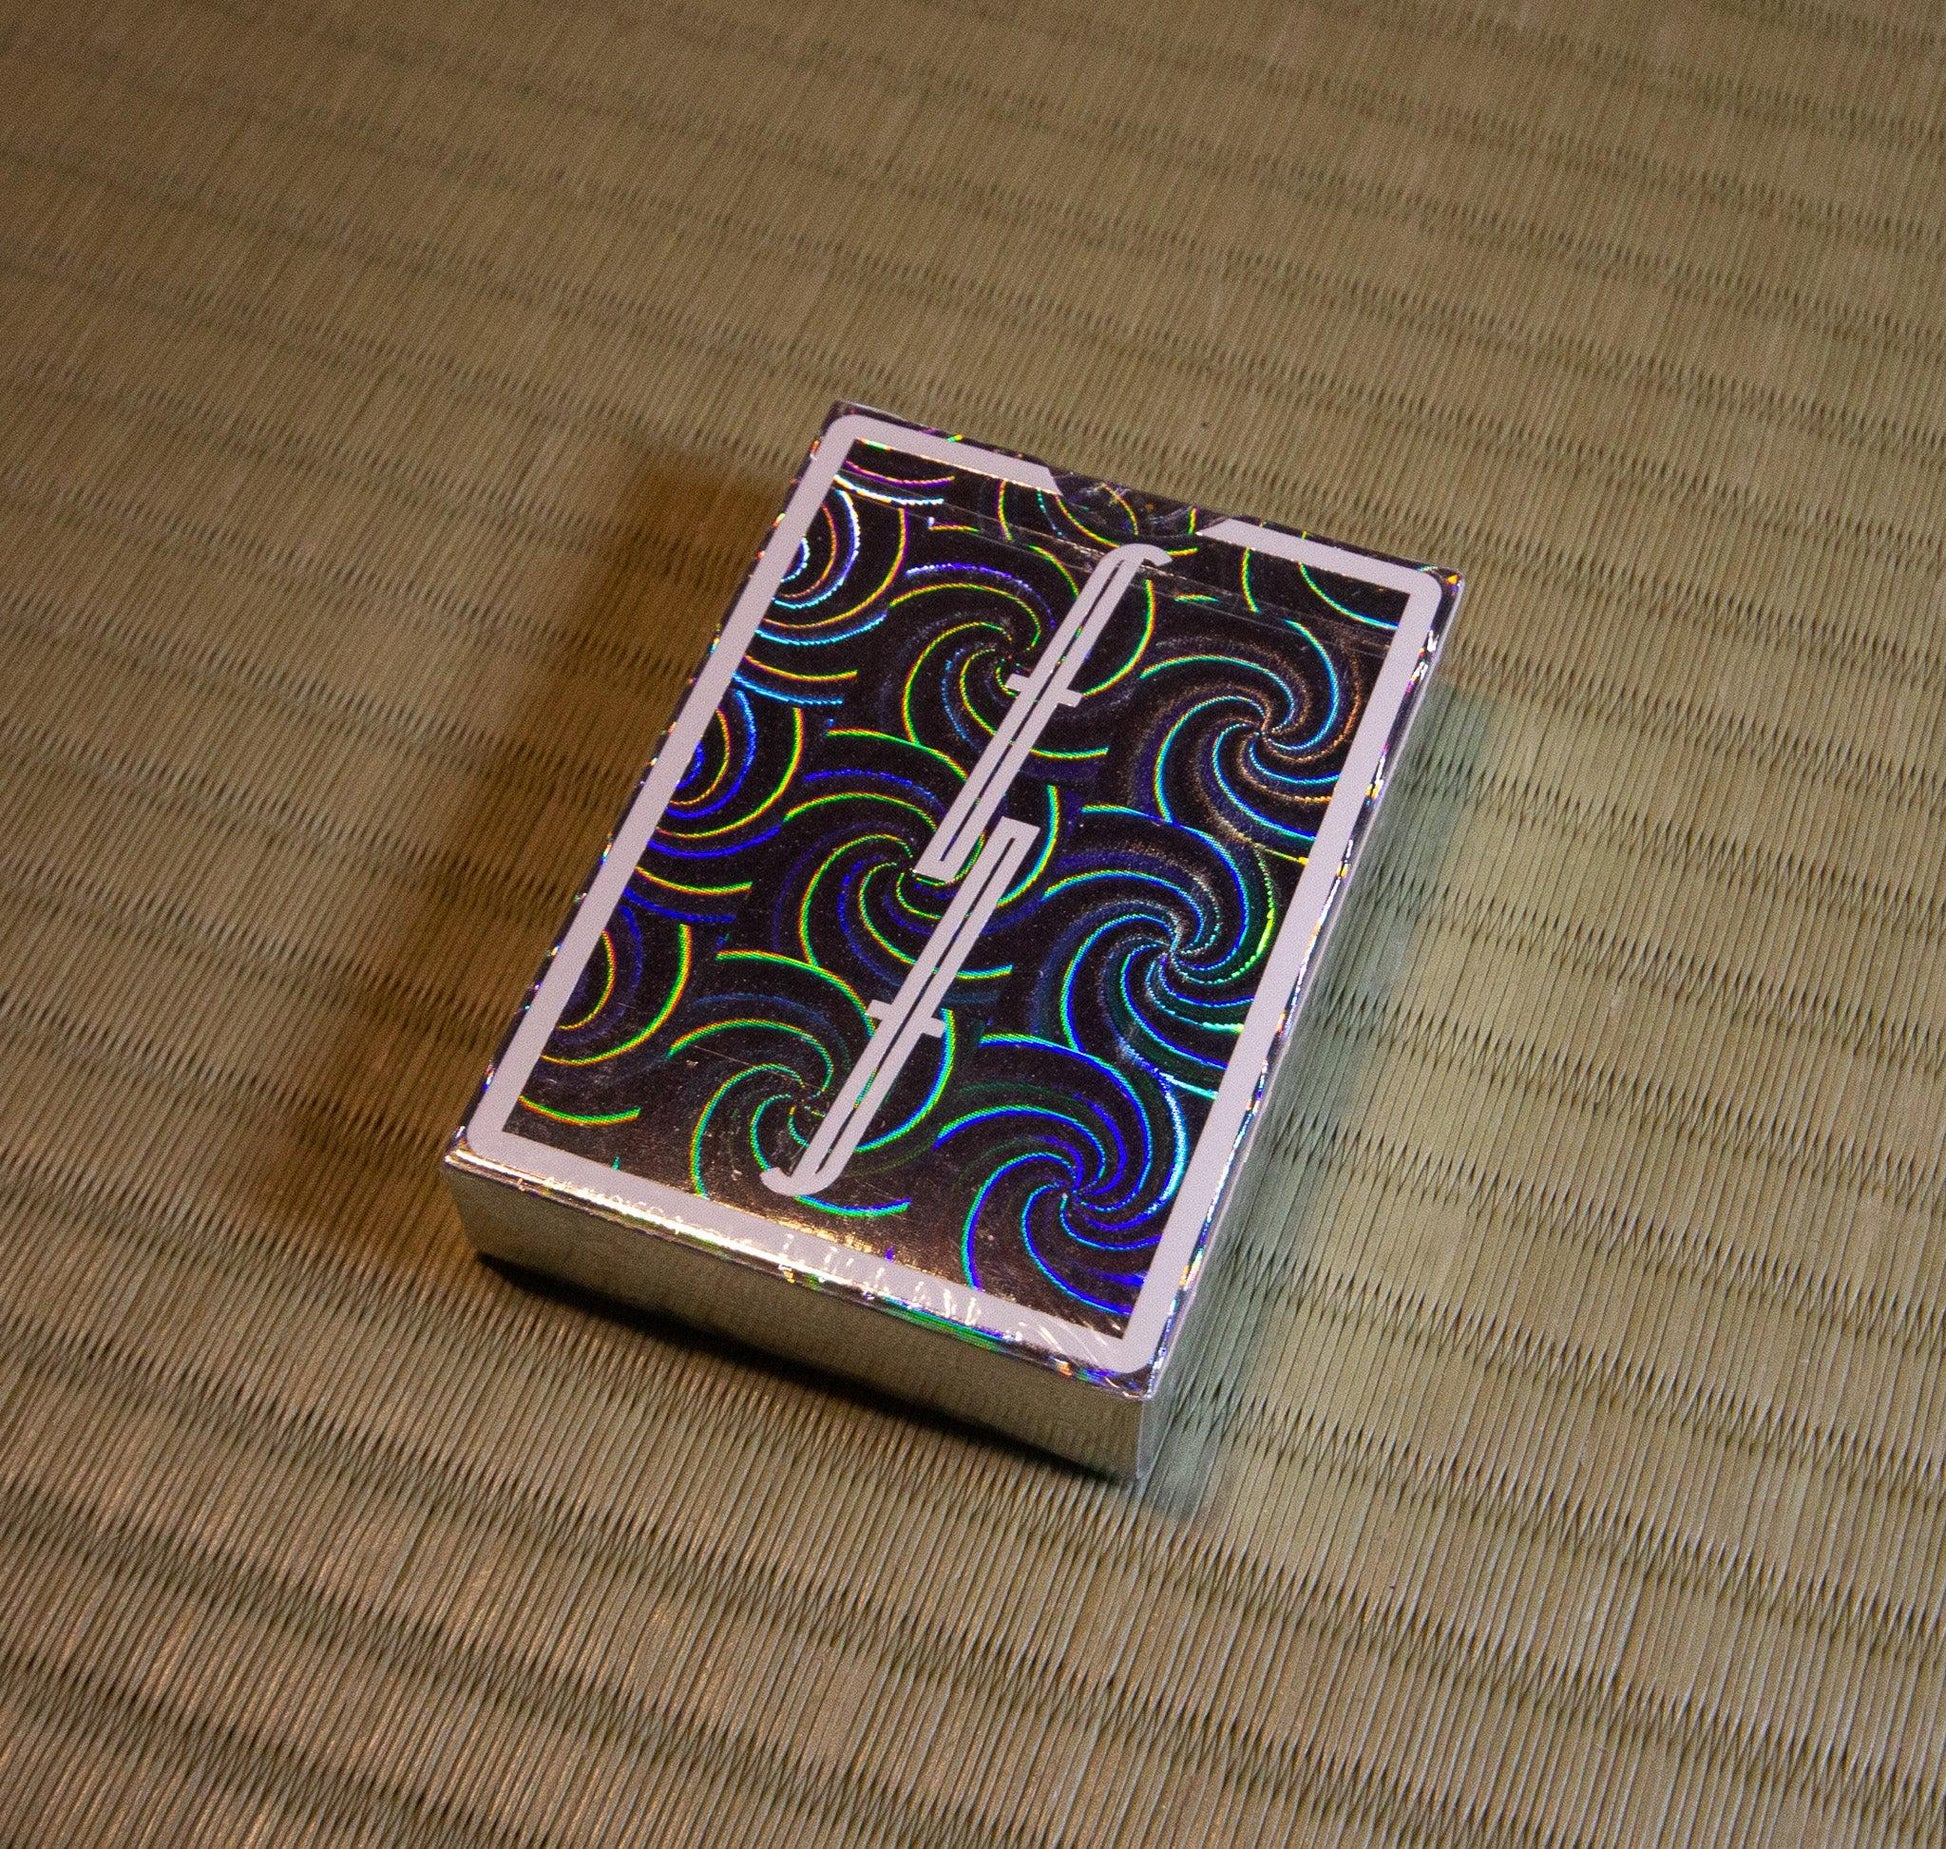 Spiral Holographic Fontaine Playing Cards by Fontaine Cards - Deckita Decks